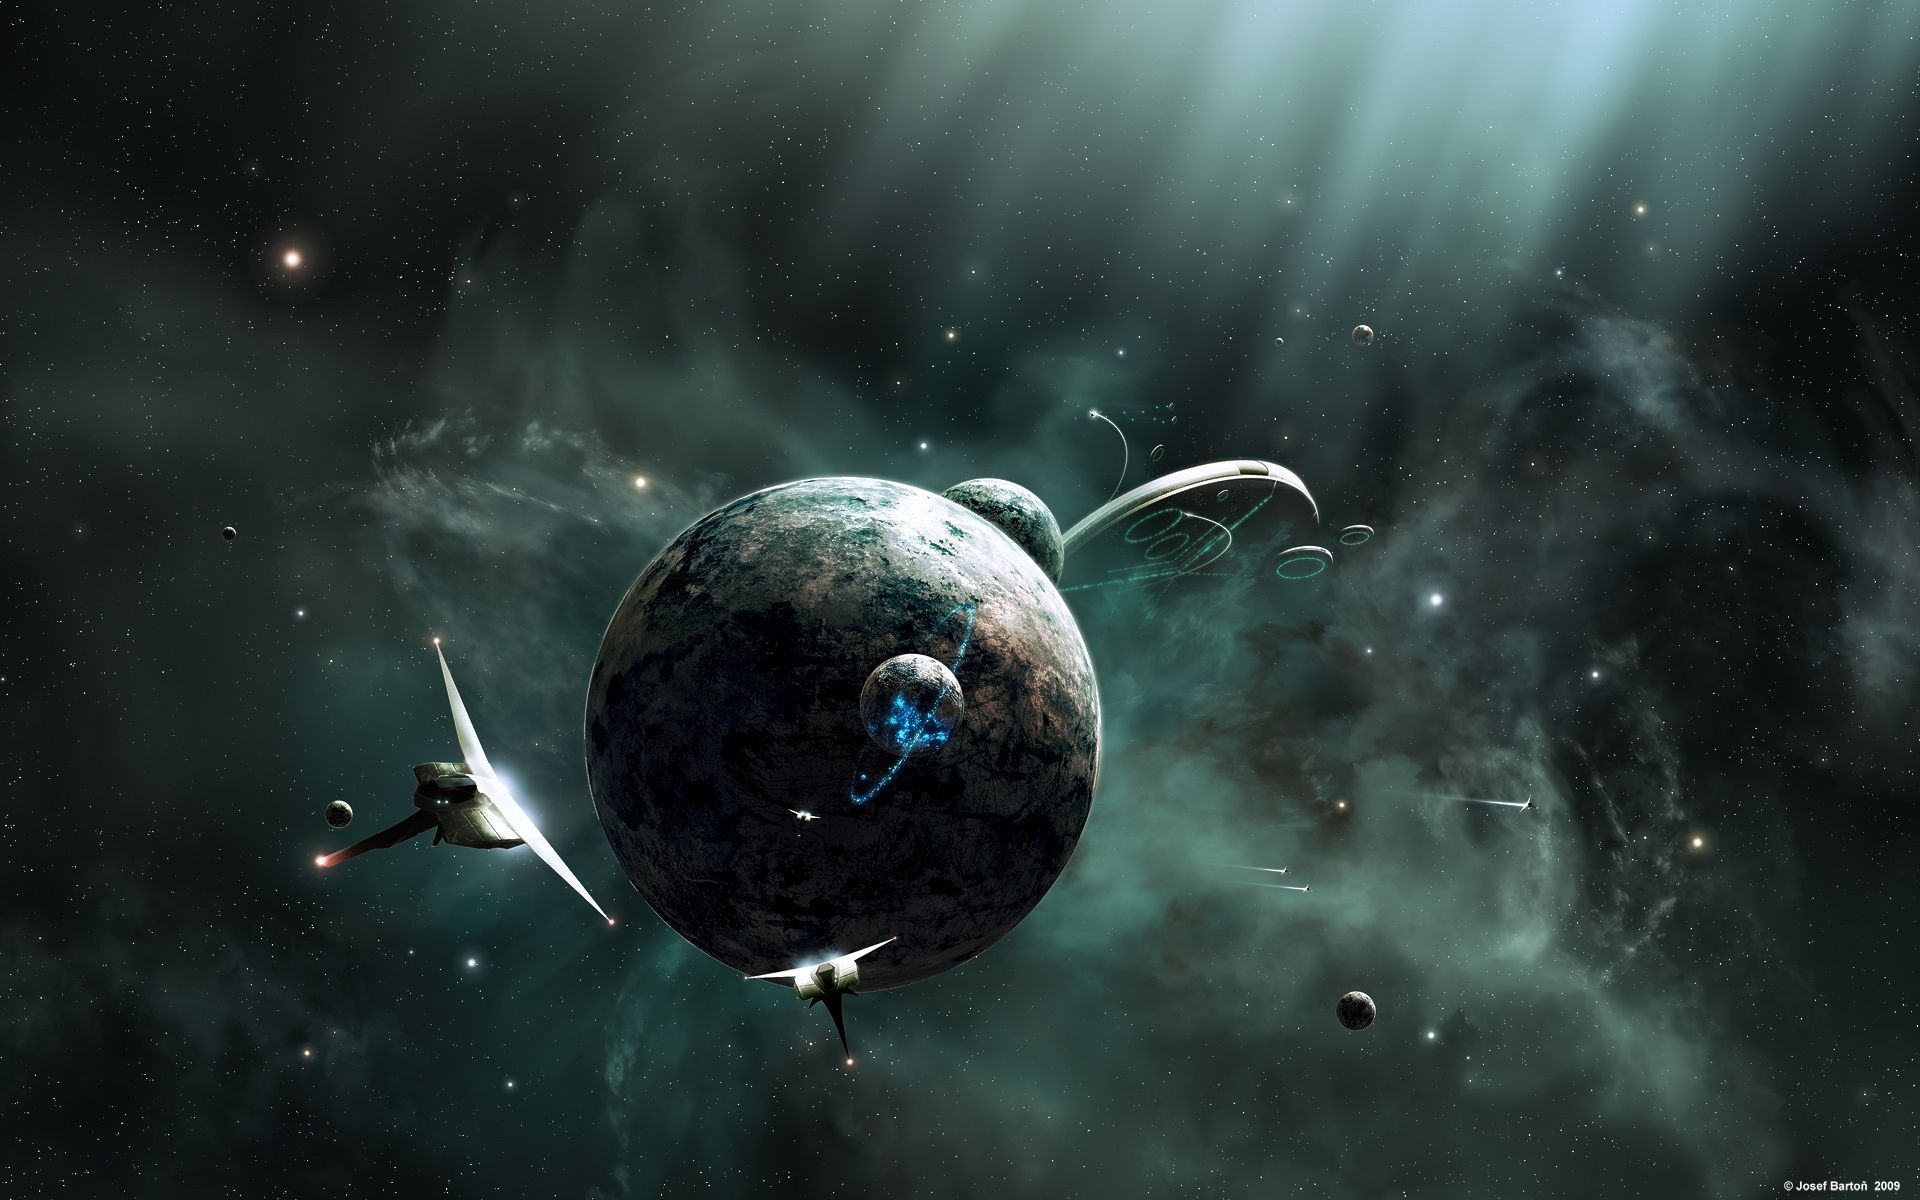 Spaceships of the future. Space art wallpaper, Space art, Planets